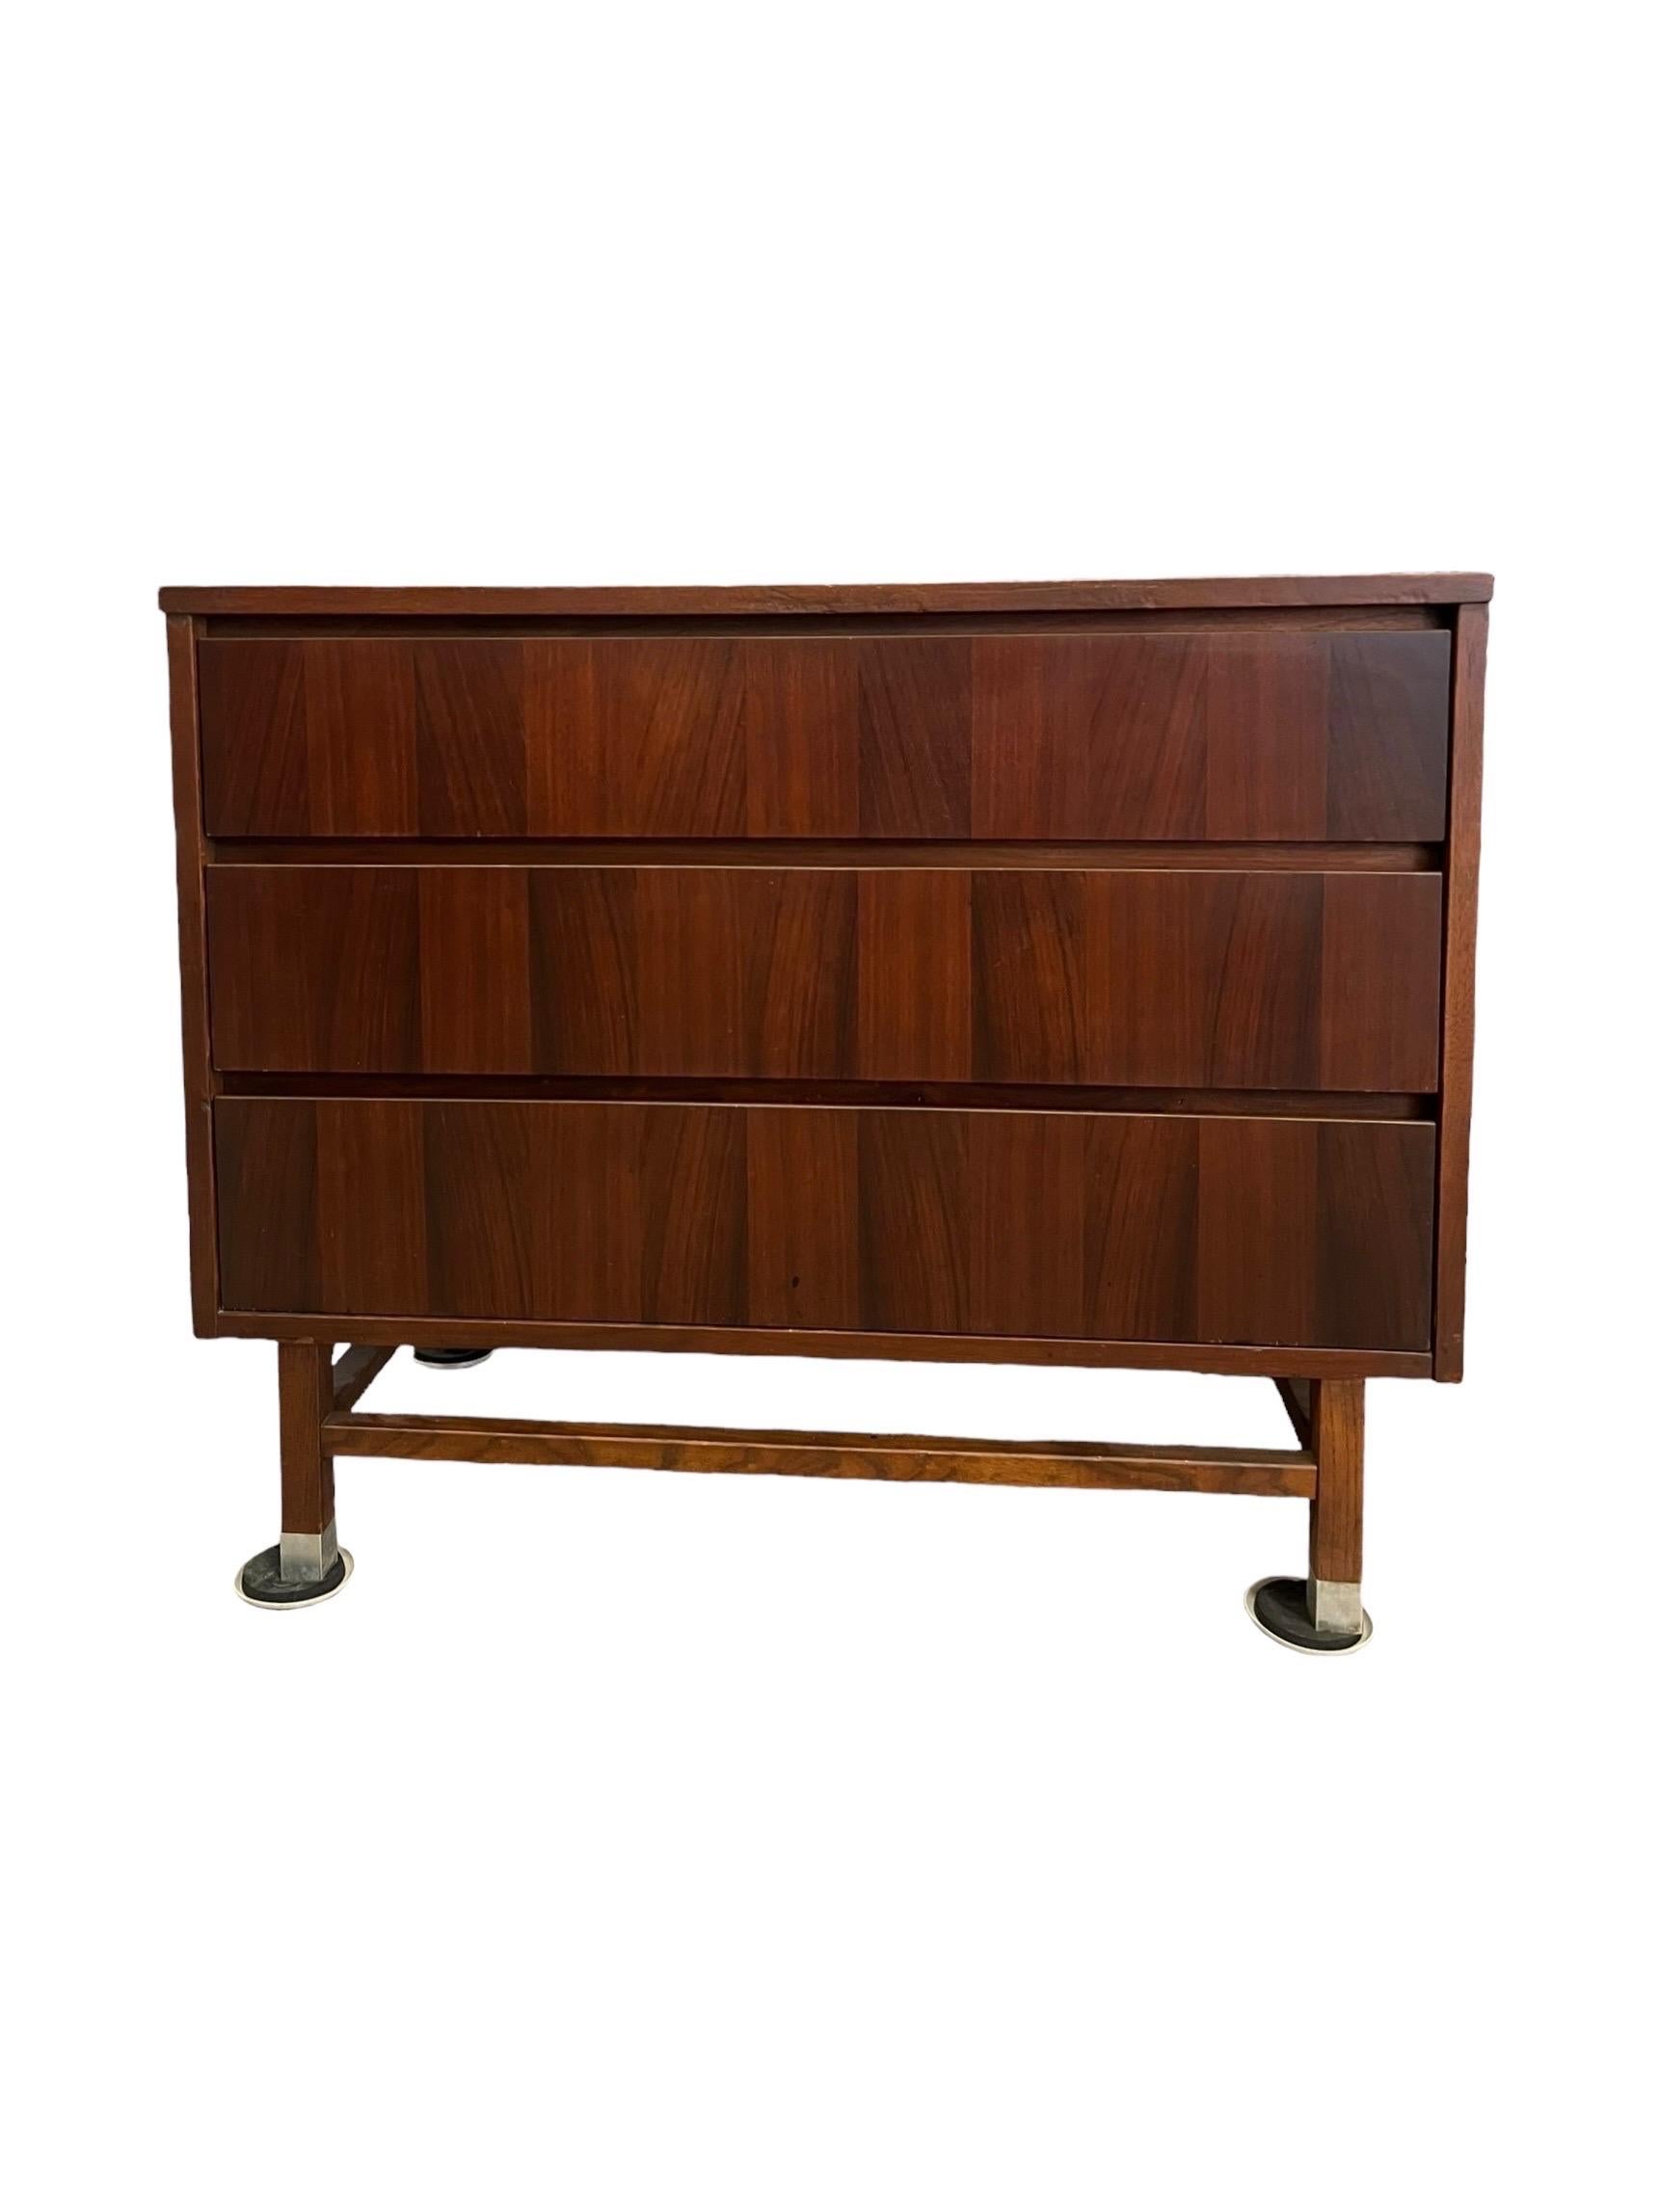 Walnut Toned piece with 3 dovetailed drawers and original finish. Mid Century Design by Stanley Furniture. Makers mark on the left side of top drawer. Vintage Condition Consistent with Age as Pictured. Circa 1970s.

Dimensions: 36W 18D 29.5H